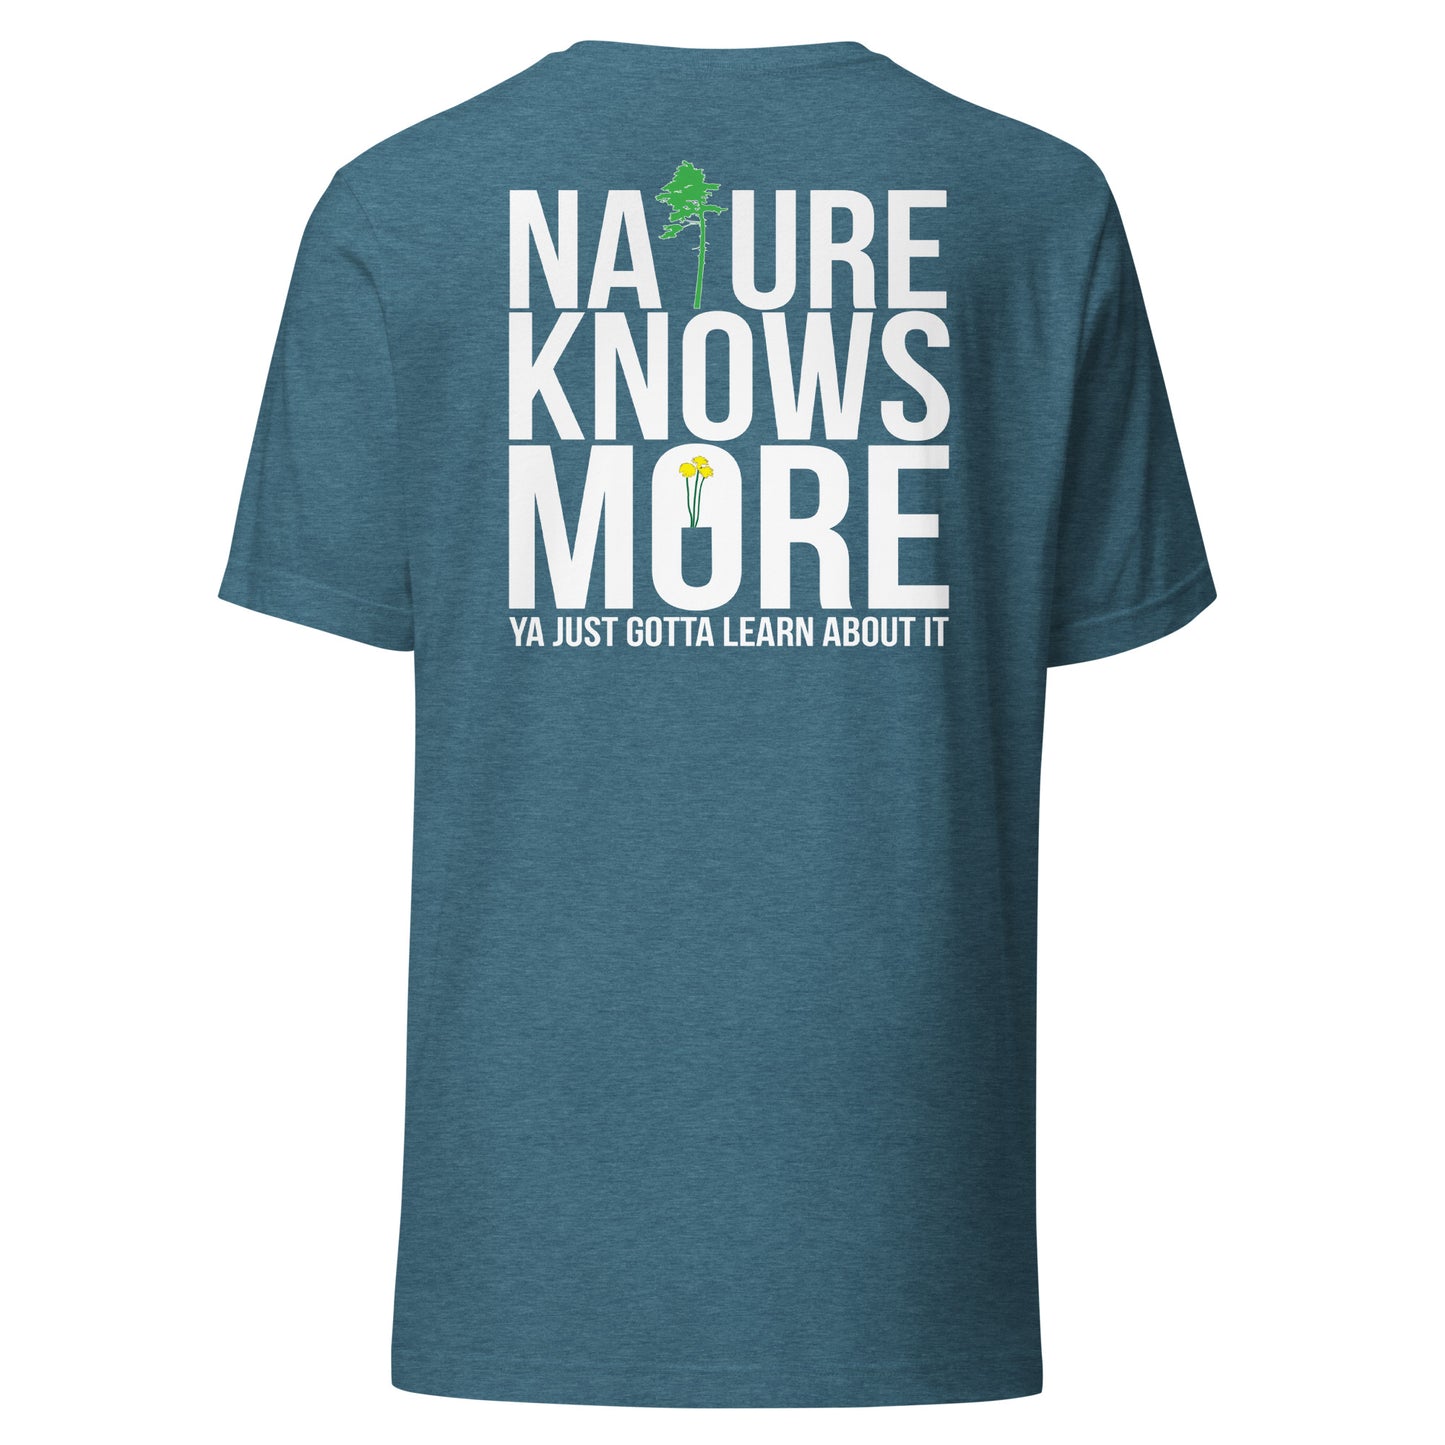 Nature Knows More Tee